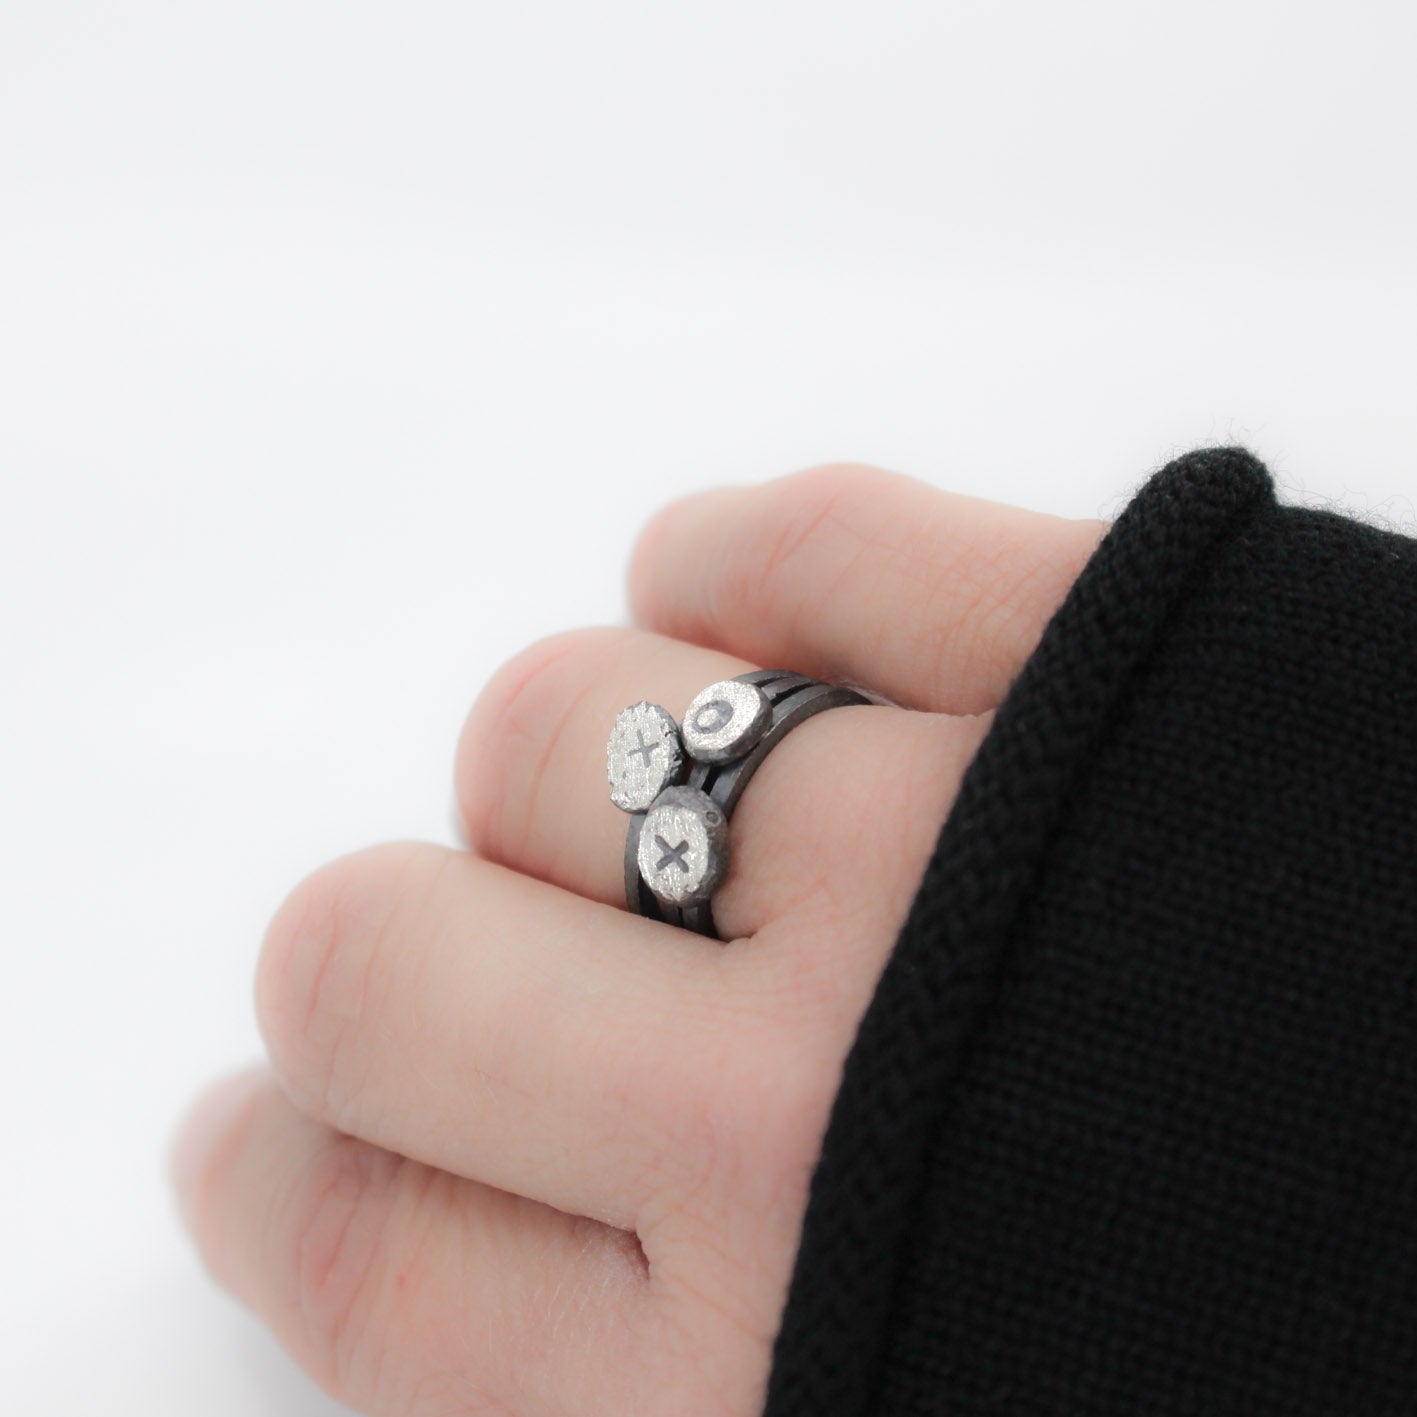 3 eco sterling silver stacking rings • handstamped xox • personalisable